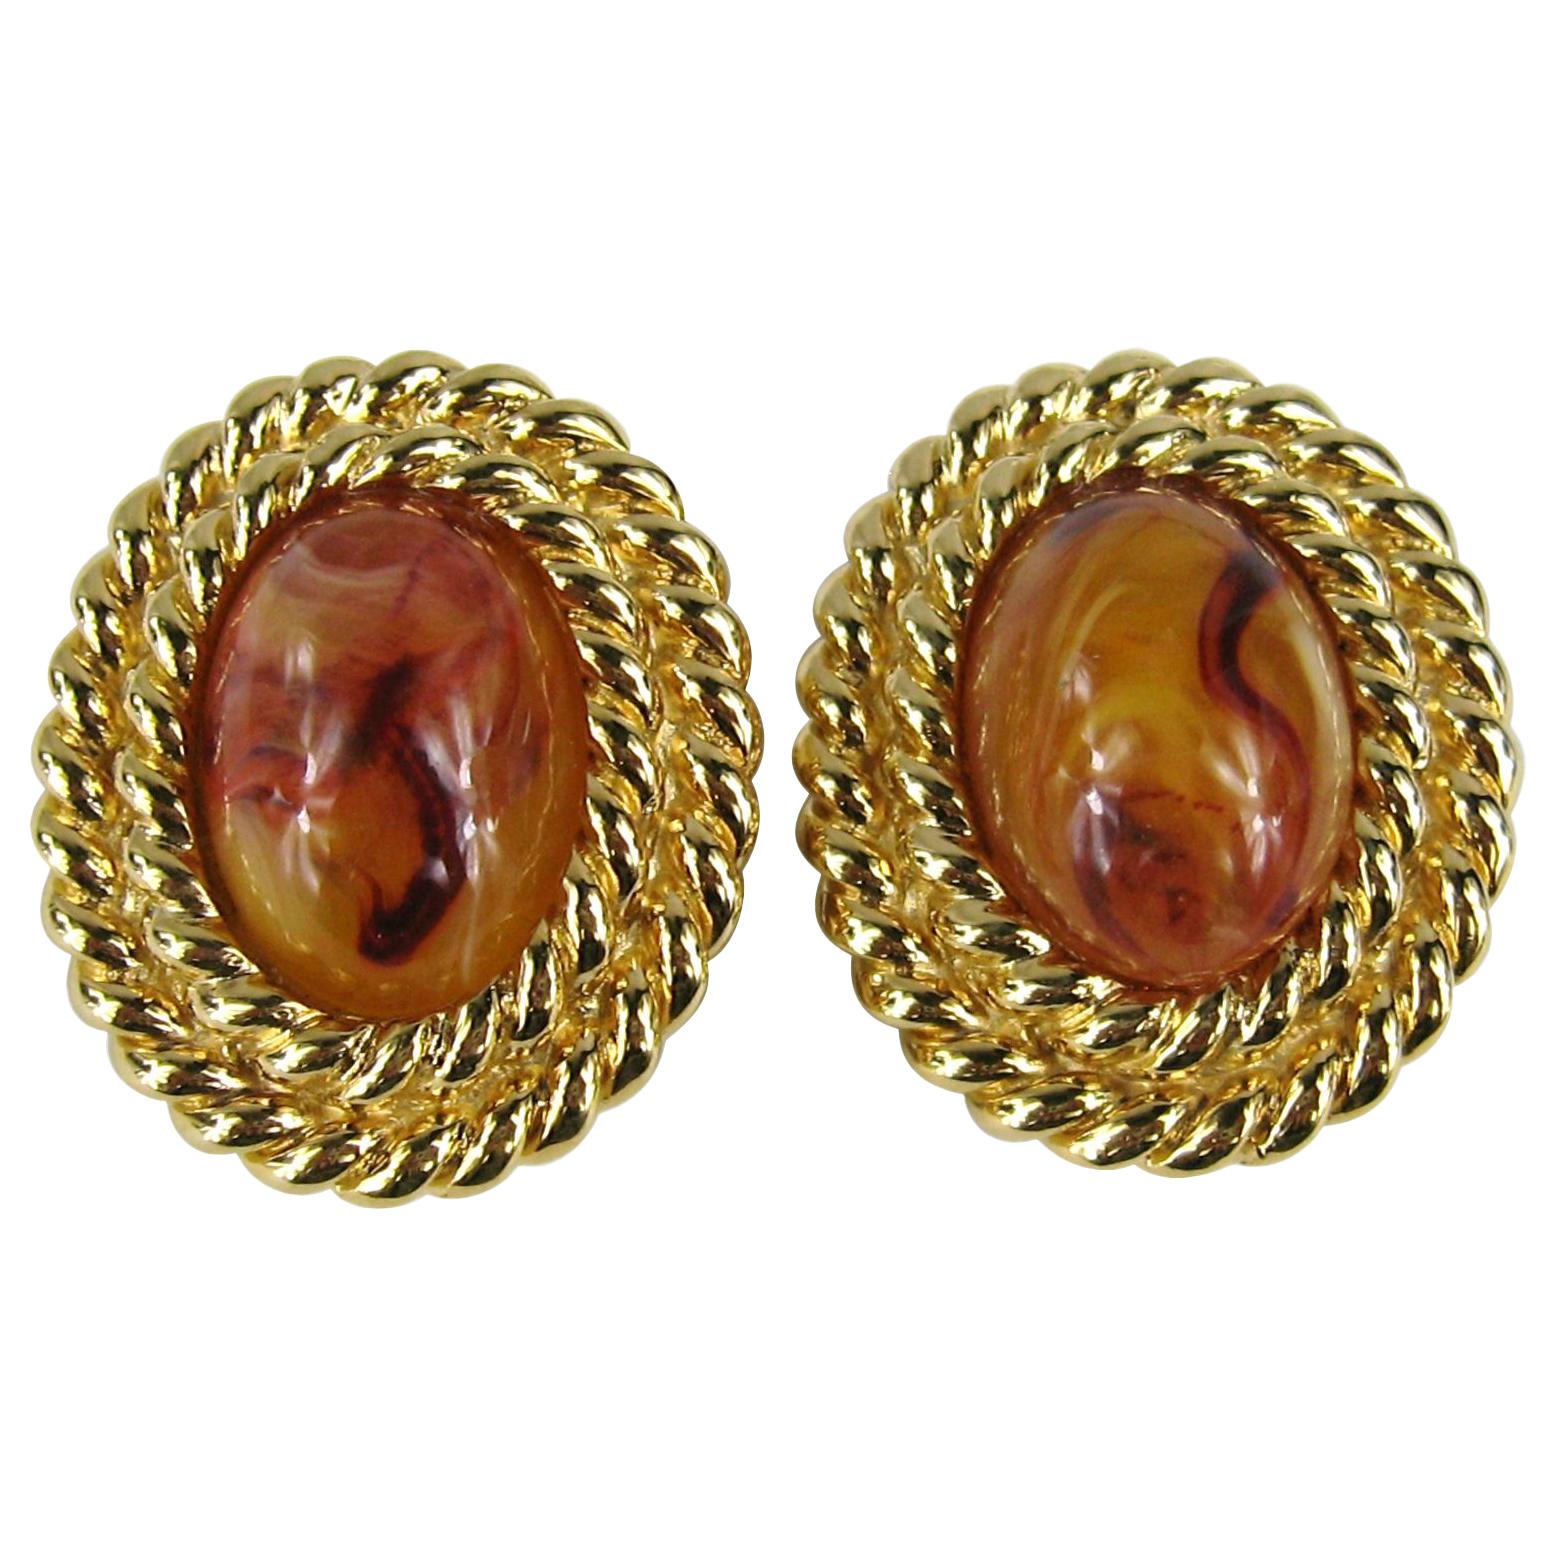  Ciner Faux amber Clip On earrings New, Never Worn 1980s For Sale